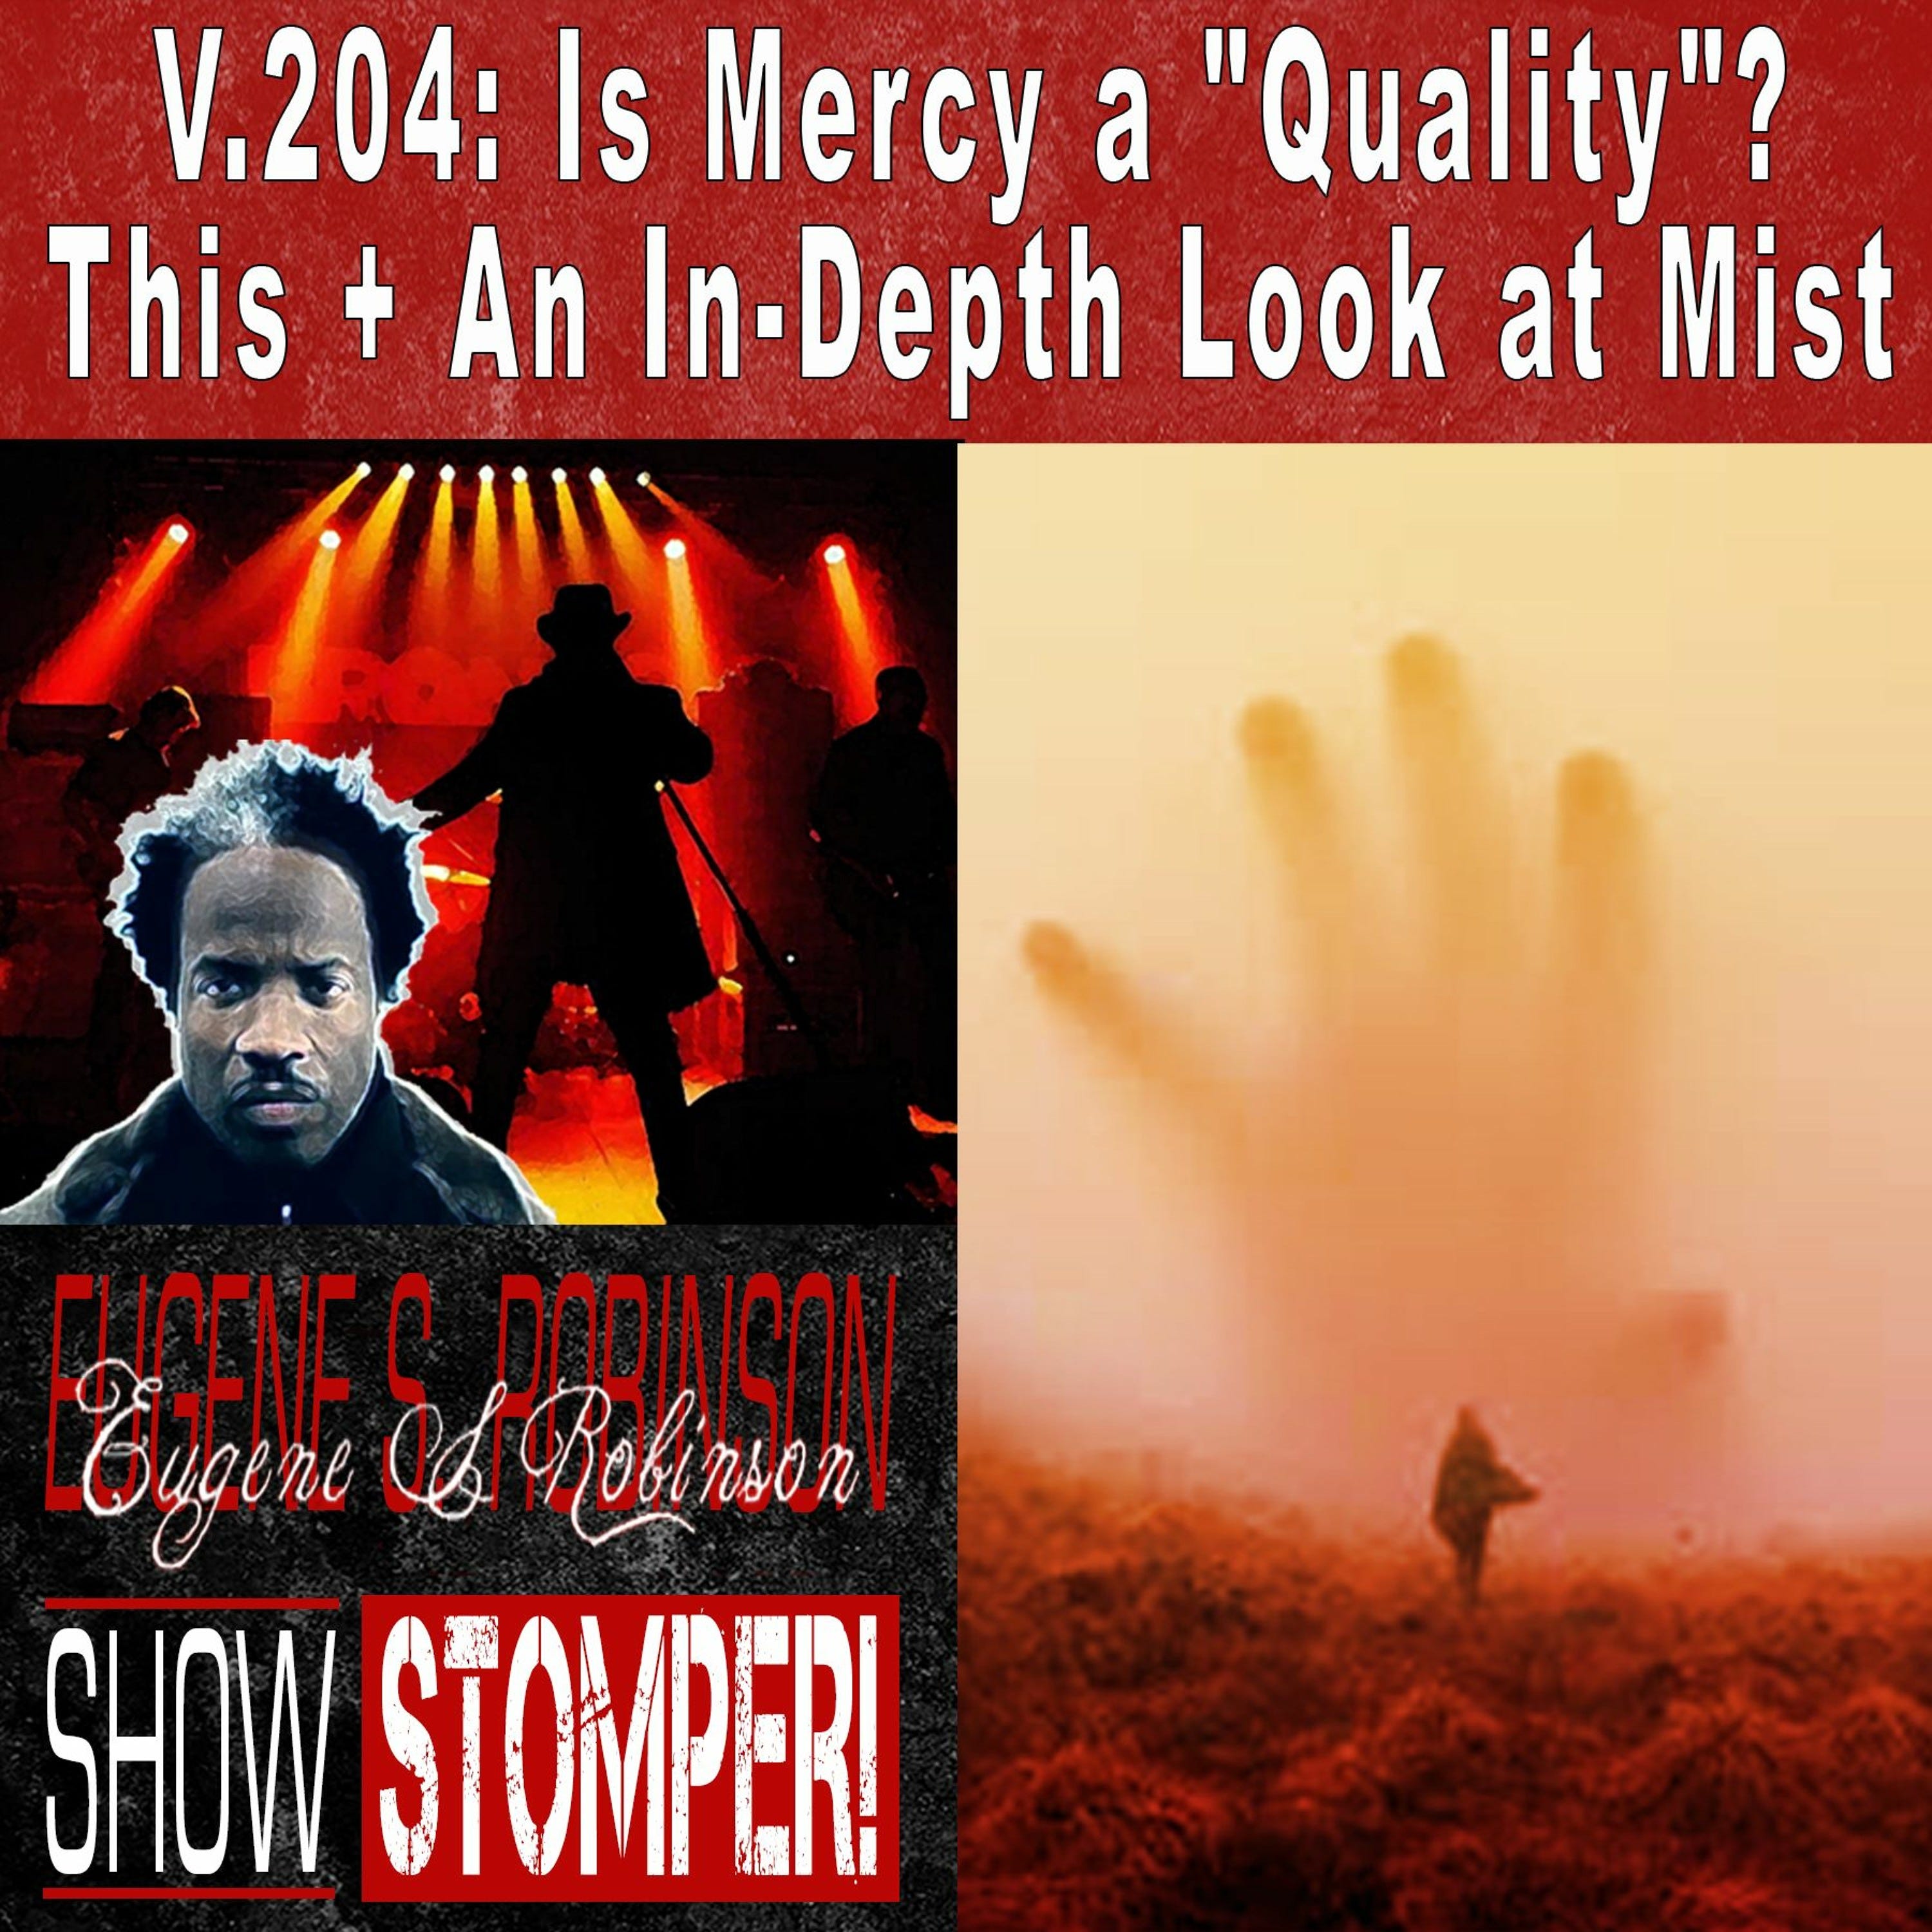 V.204 Is Mercy A 'Quality' This + An In - Depth Look At Mist On The Eugene S. Robinson Show Stomper